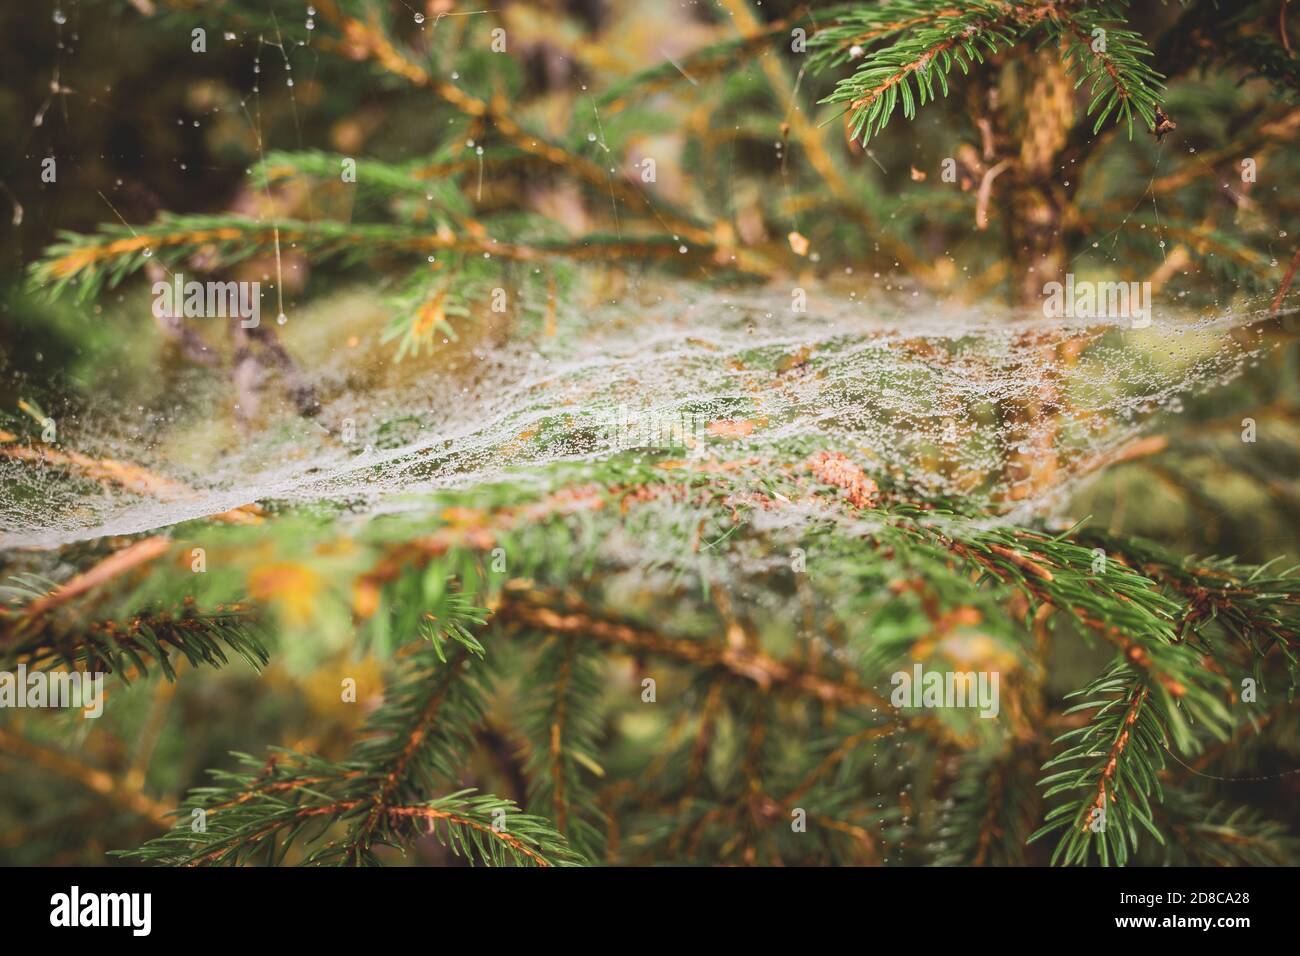 spider web with dew on the branches of a tree Stock Photo